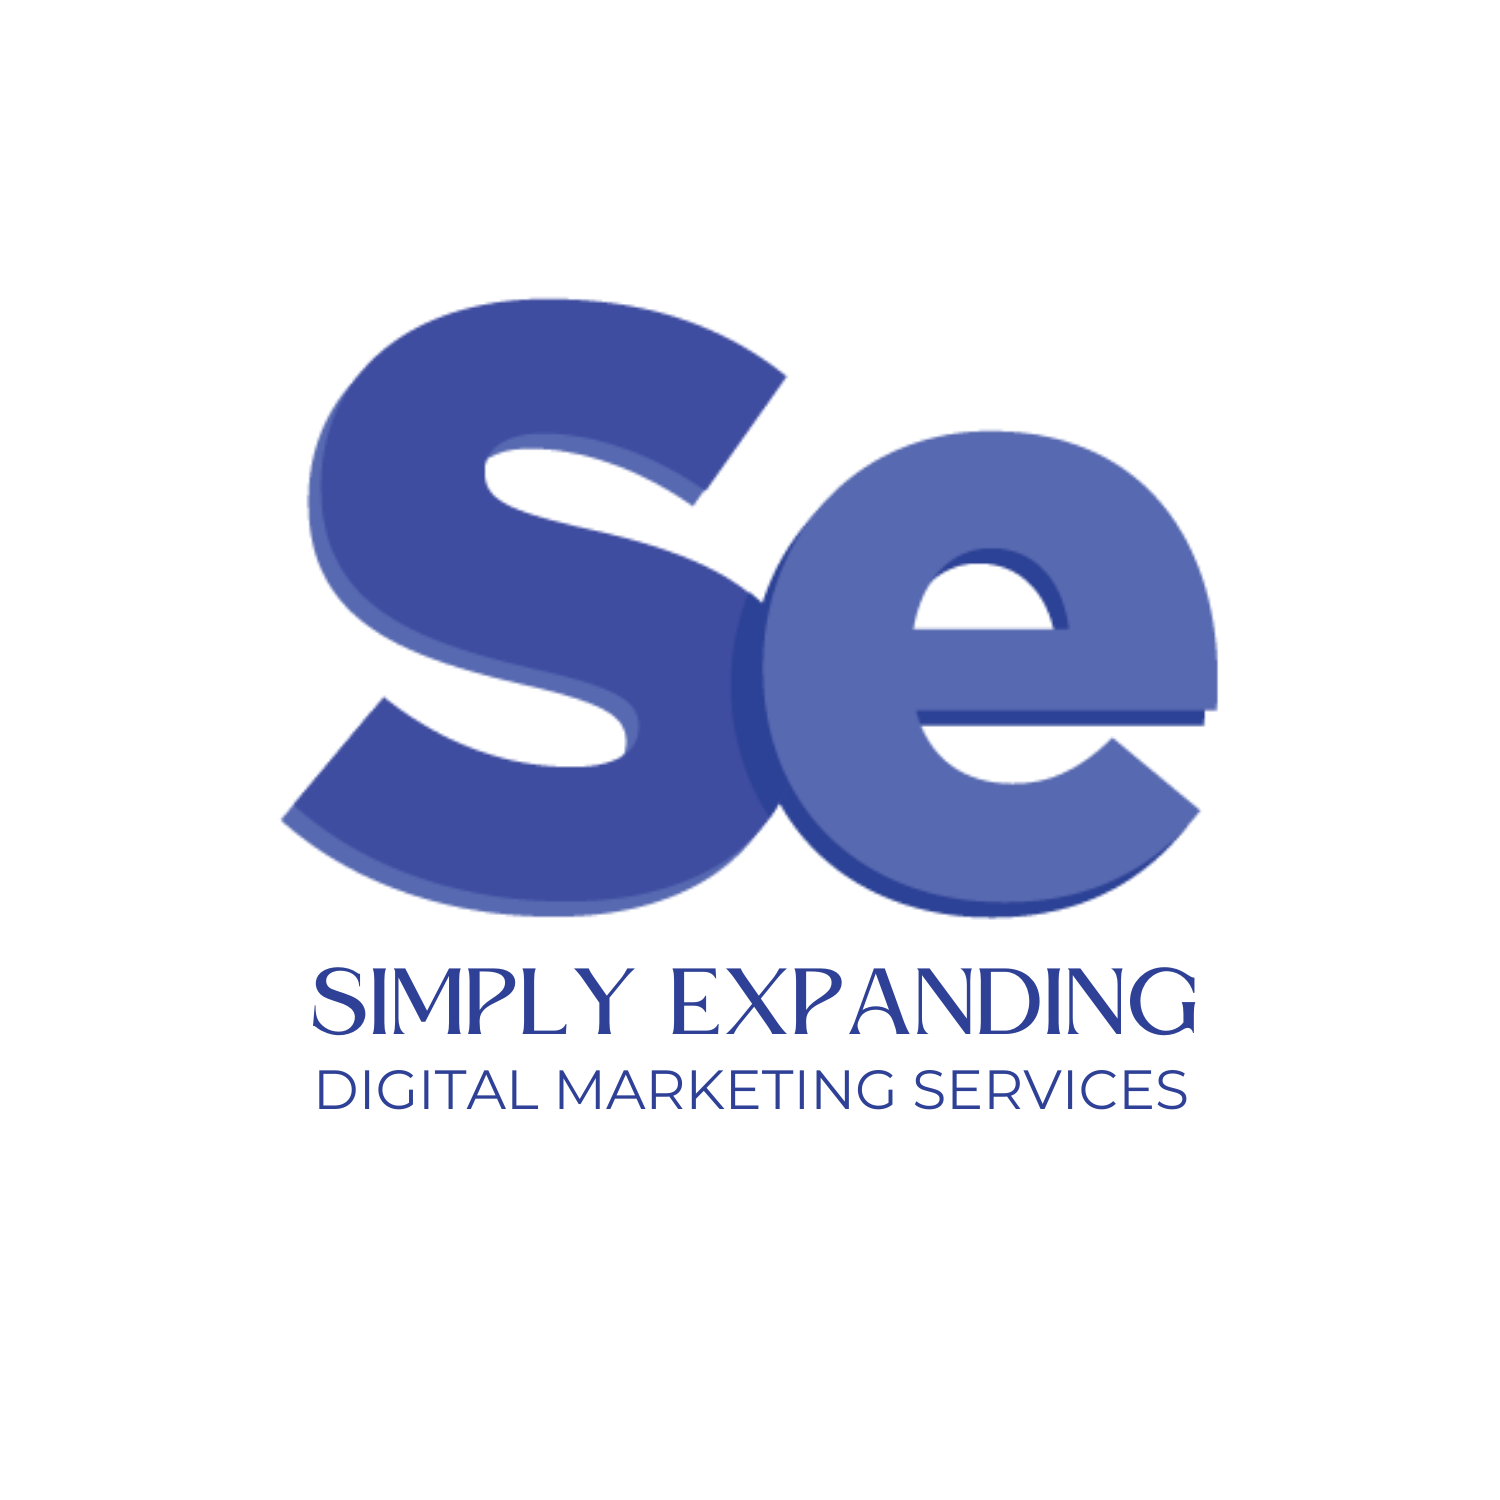 Simply Expanding Digital Marketing Services